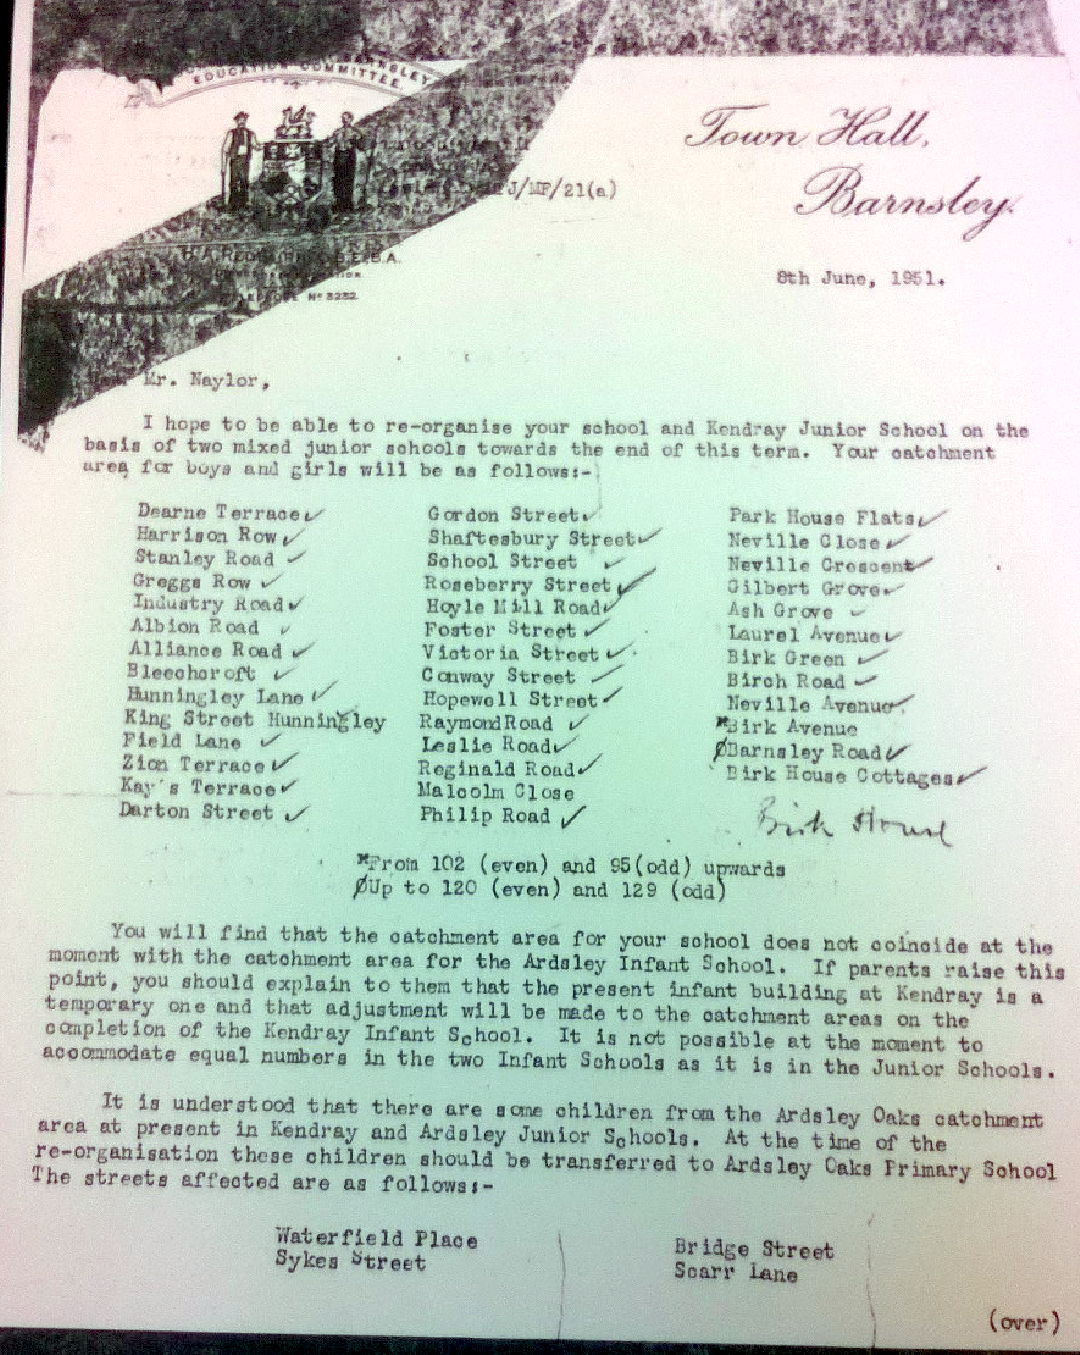 Allocation of pupils for Hunningley Lane One School 1951